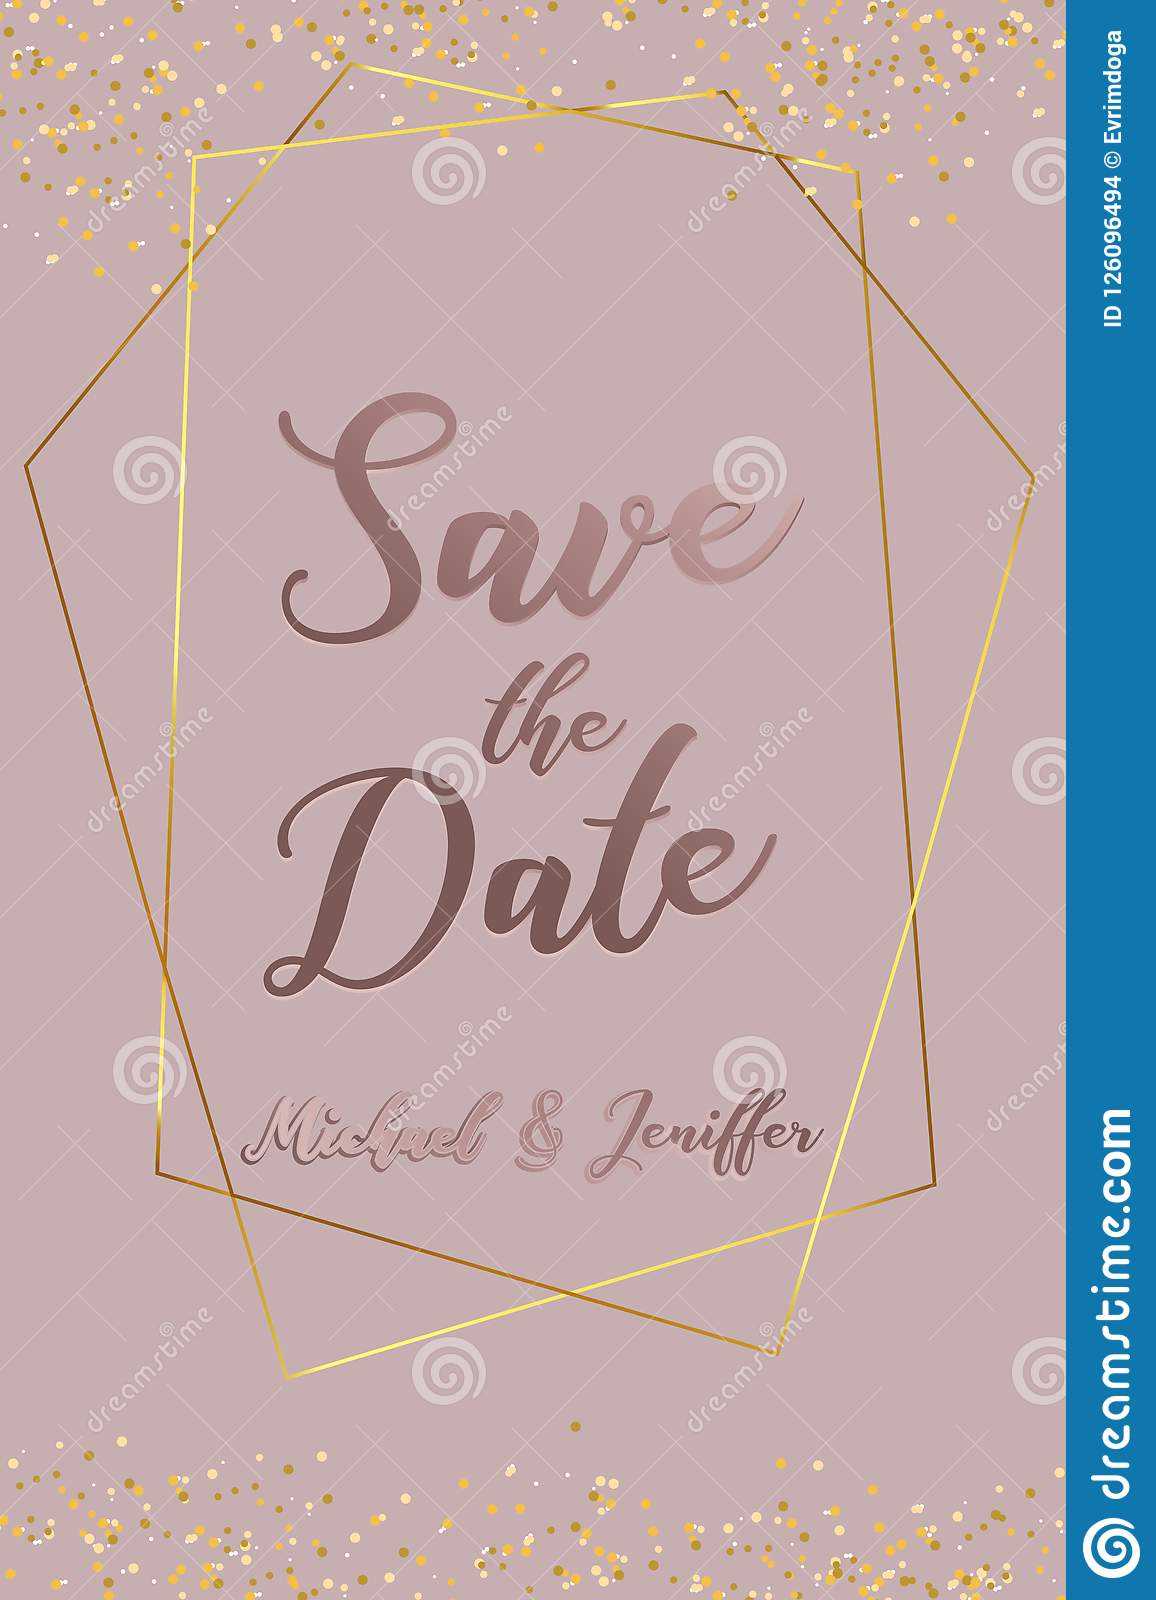 Wedding Invitation, Thank You Card, Save The Date Card Throughout Save The Date Banner Template